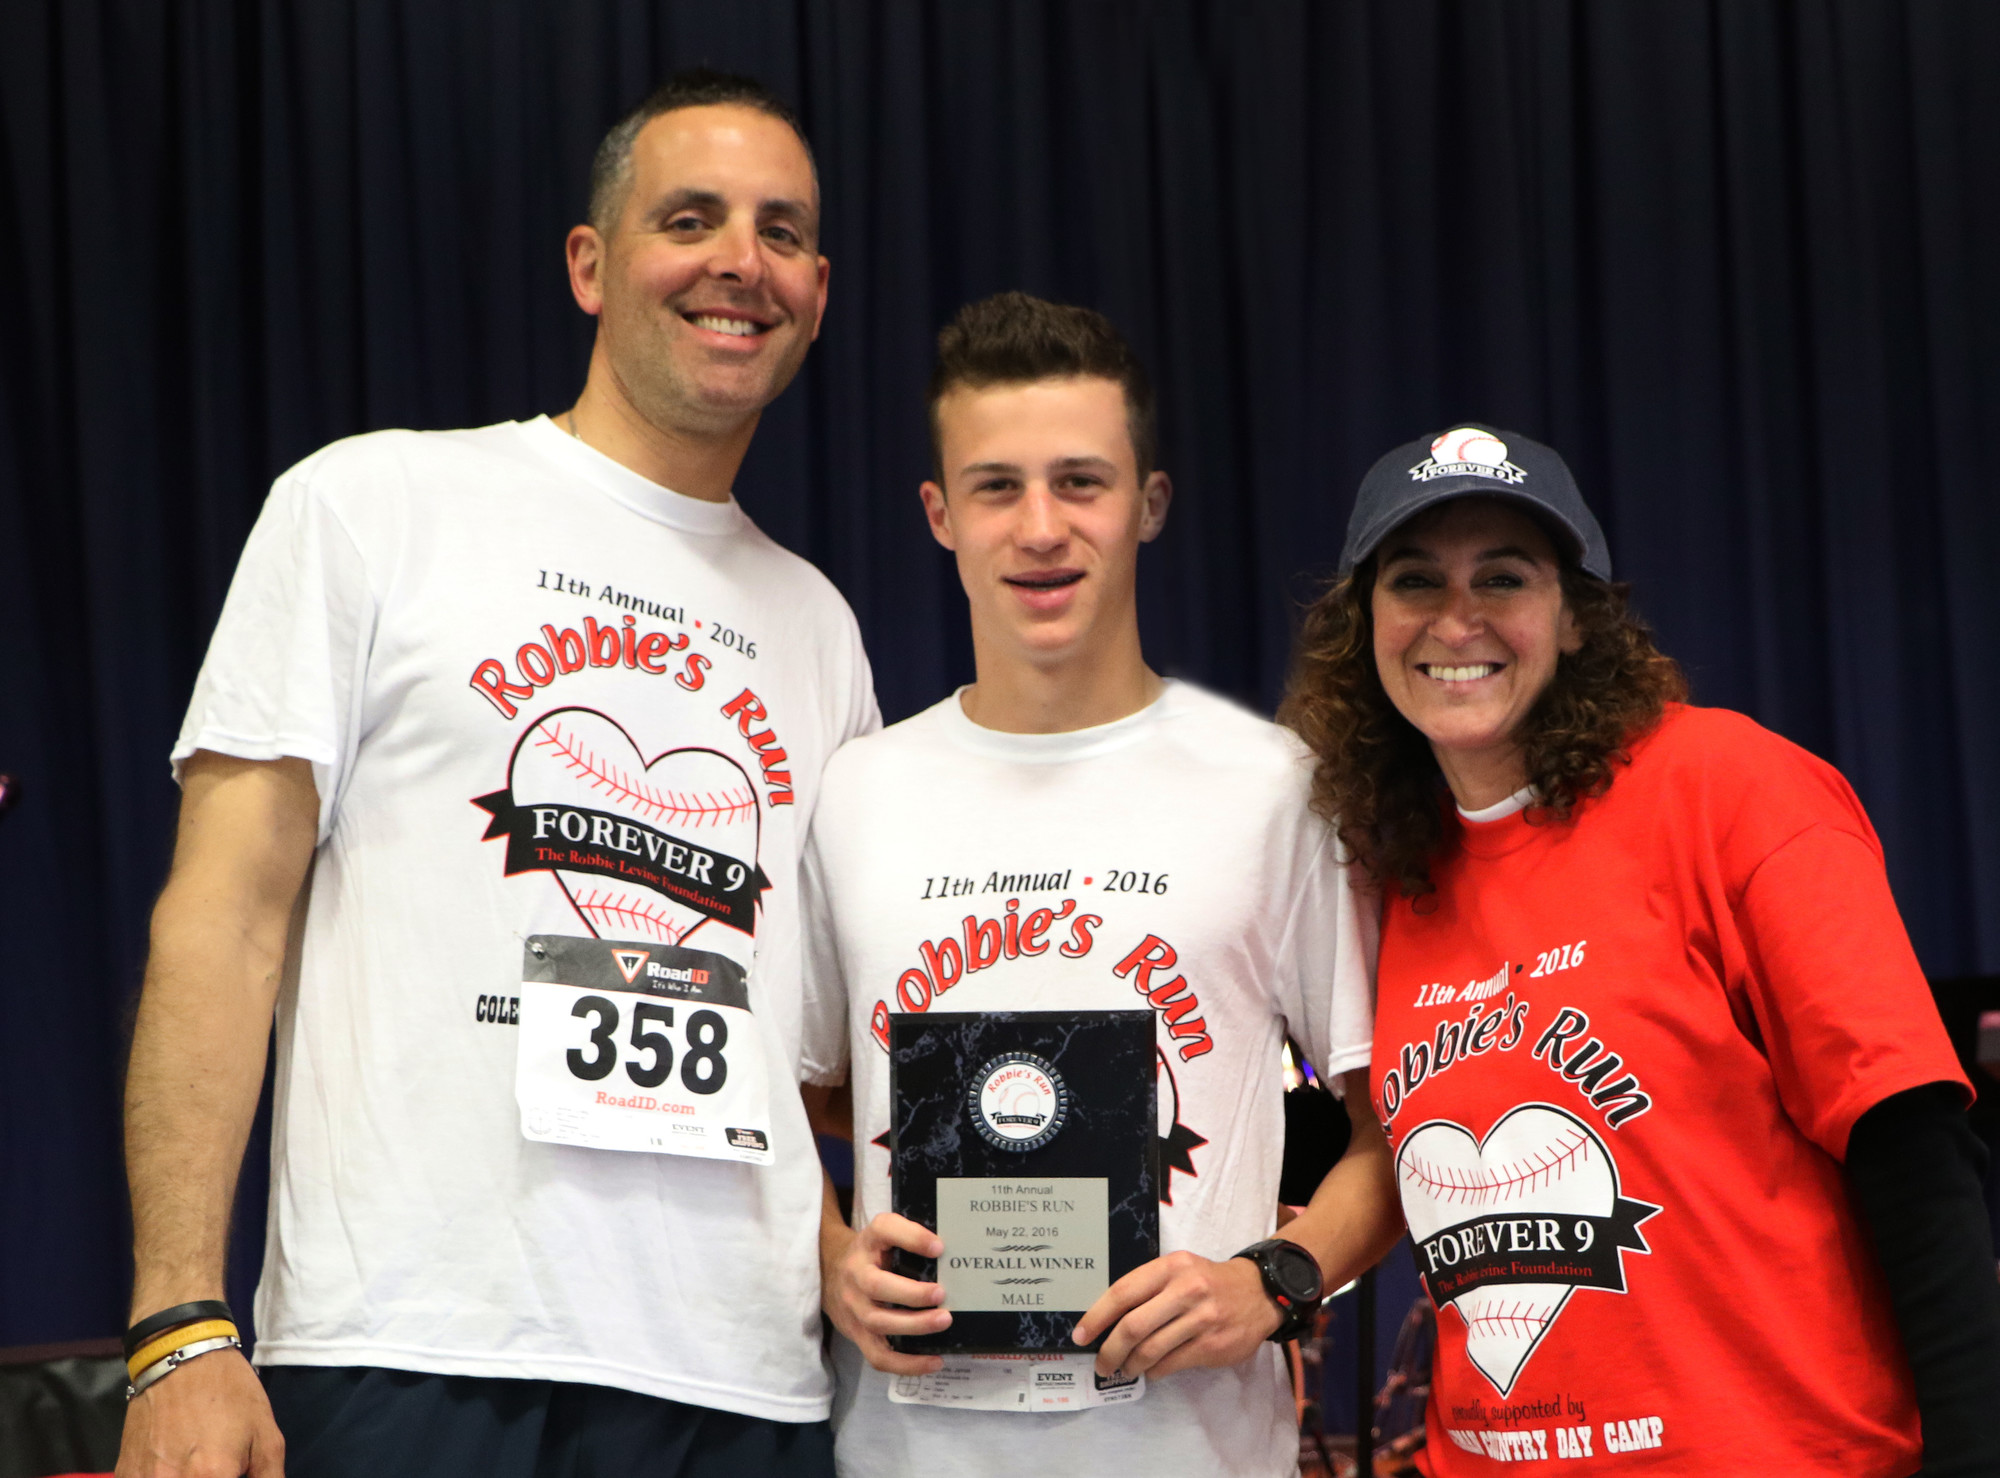 Forever 9 Foundation founders Craig Levine, and his wife, Jill, presented overall winner James Forte with his first-place plaque.